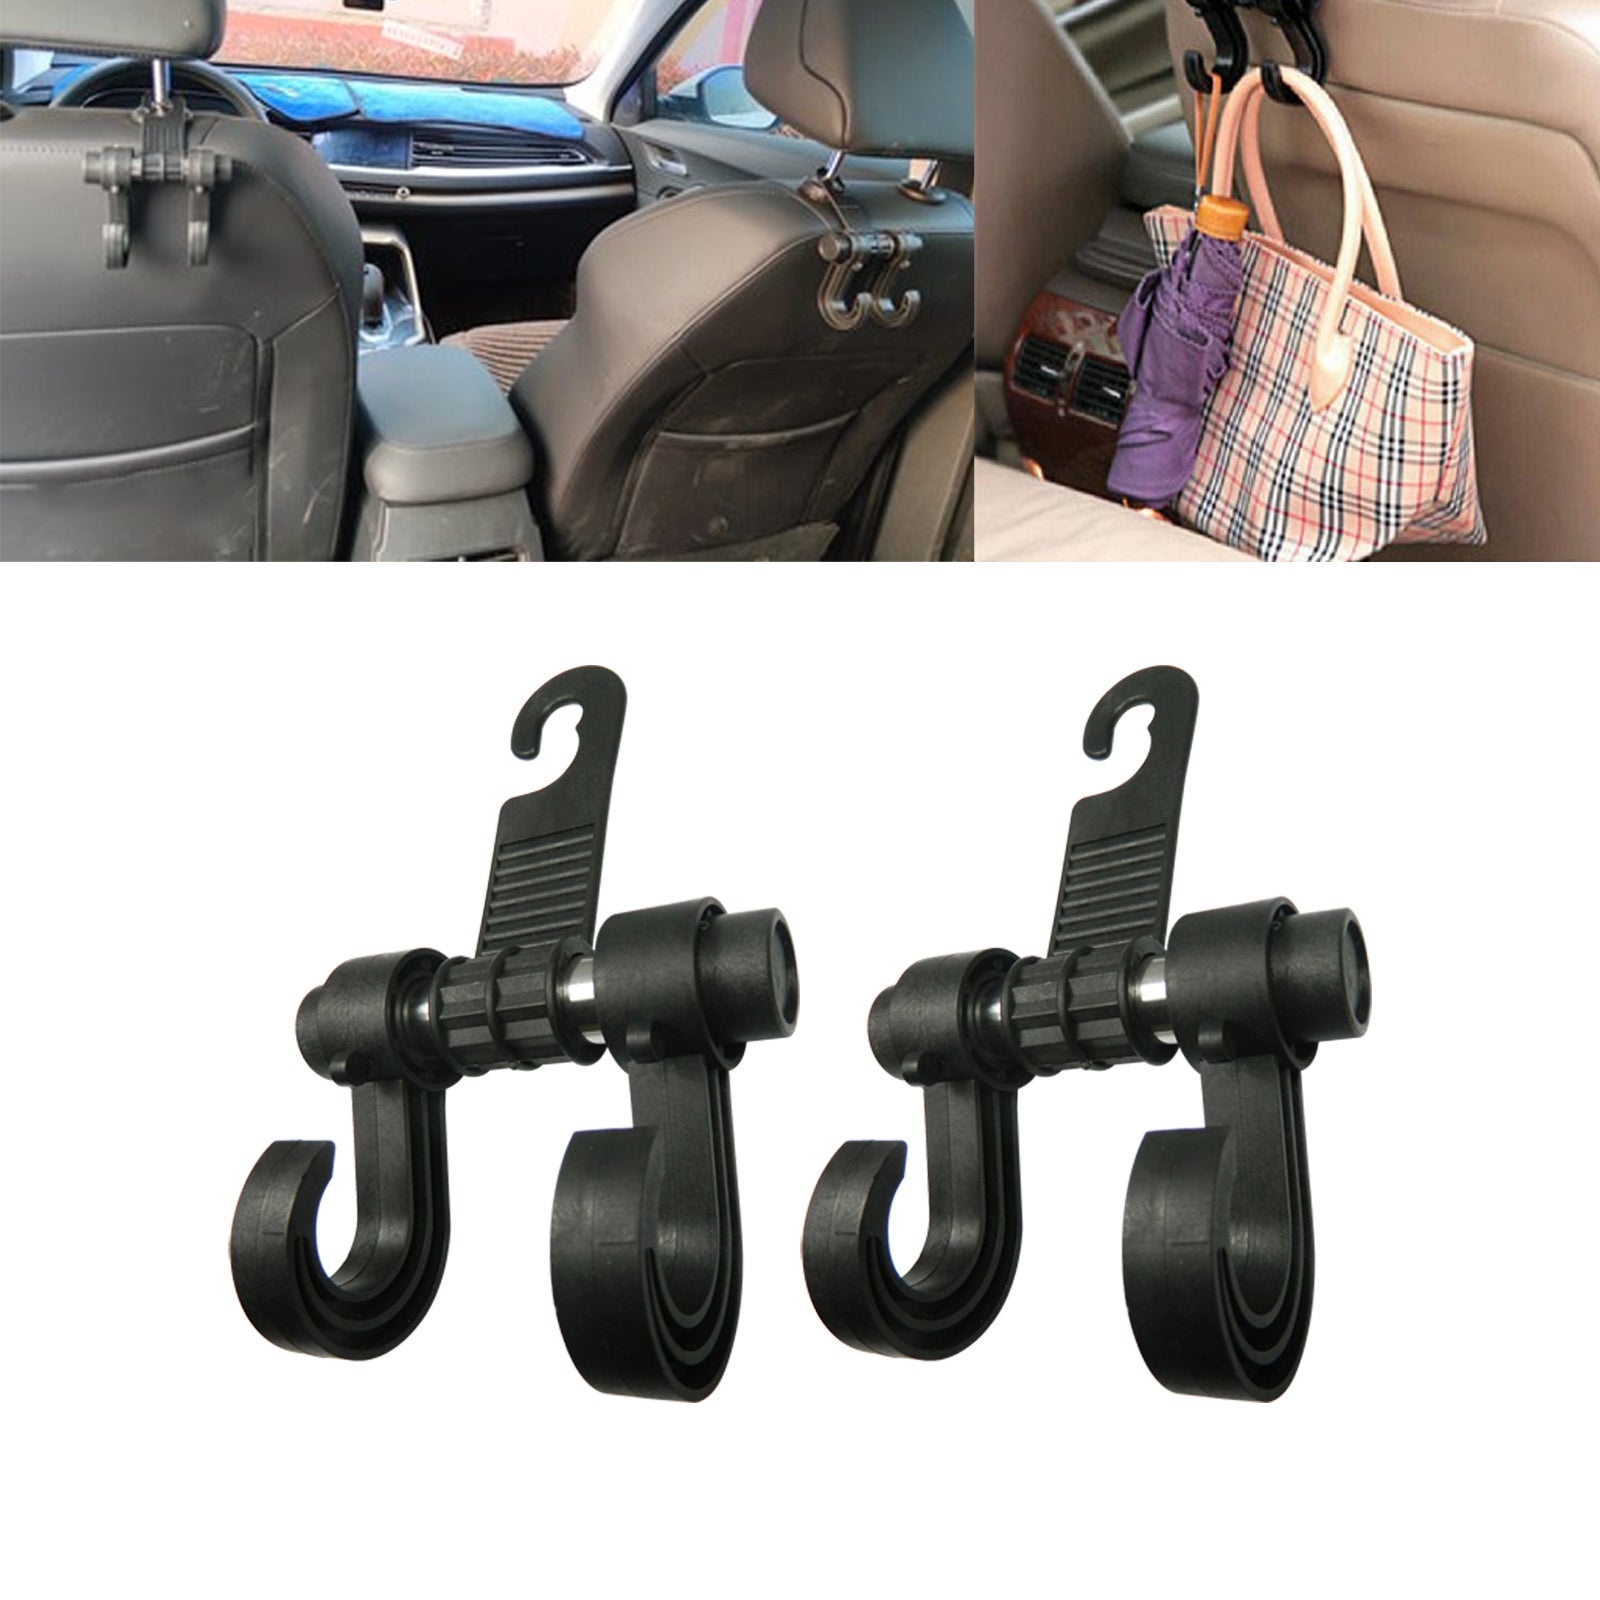 Cheap Car Hooks Seat Back Double Hook For Coat And Bag Car Hook